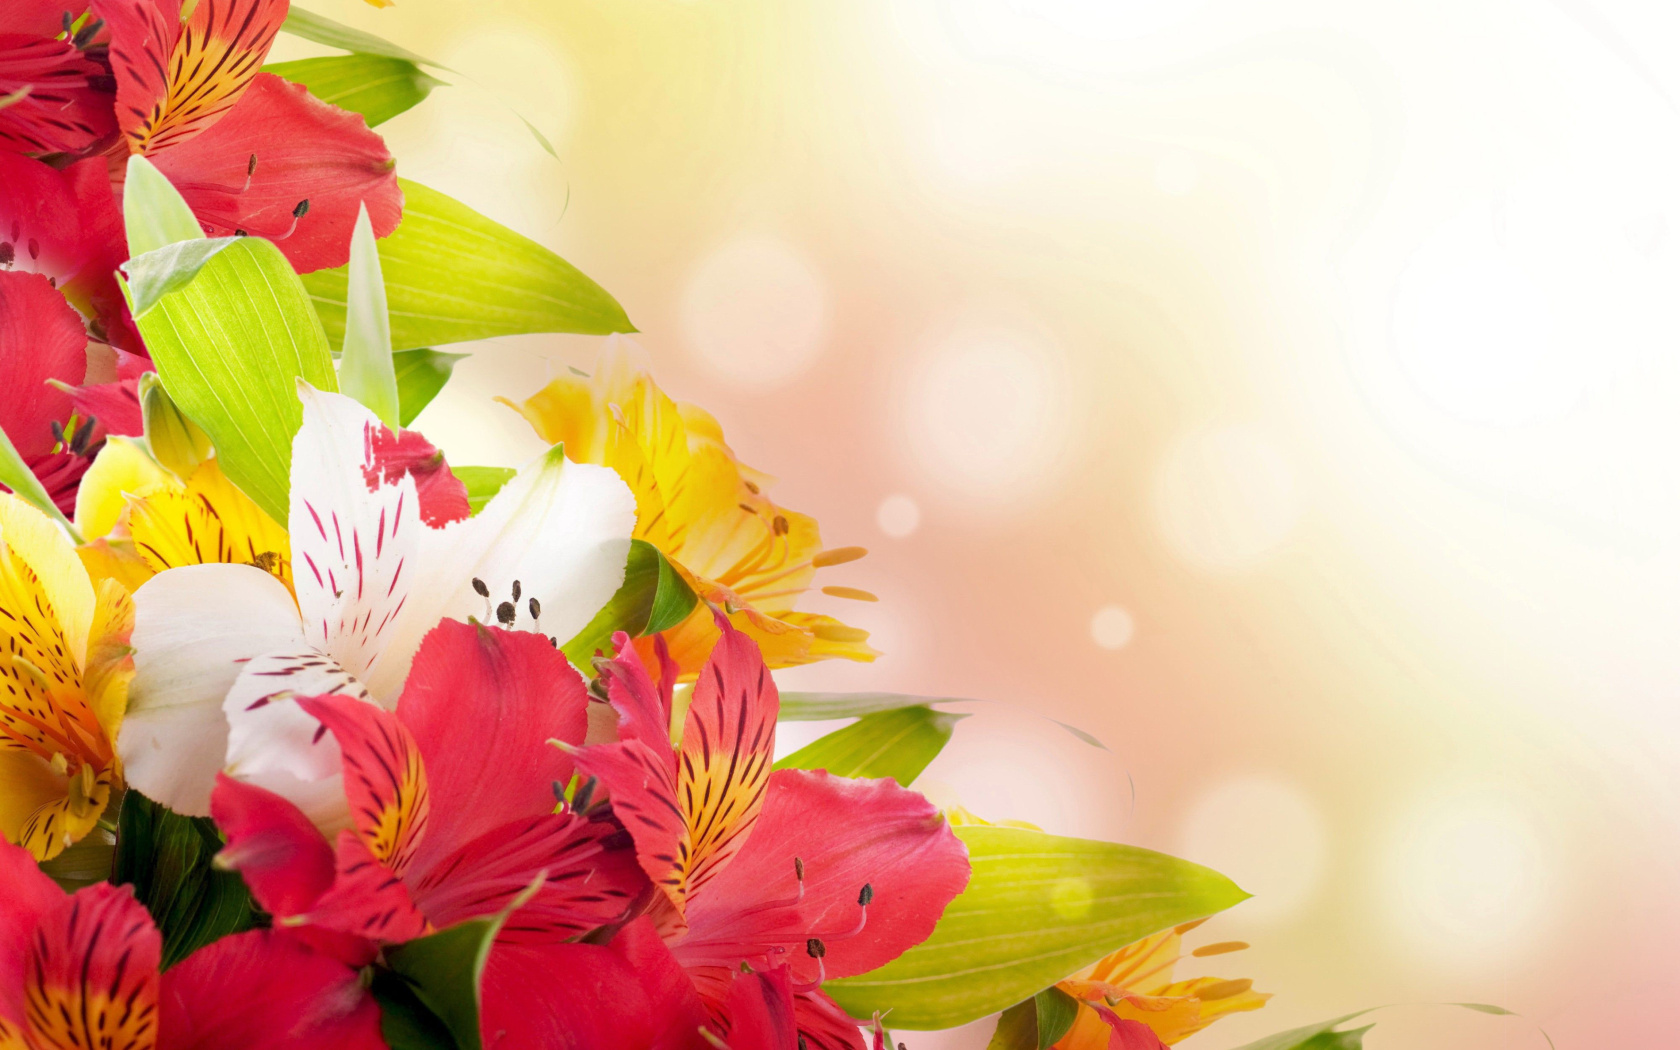 Flowers for the holiday of March 8 wallpaper 1680x1050